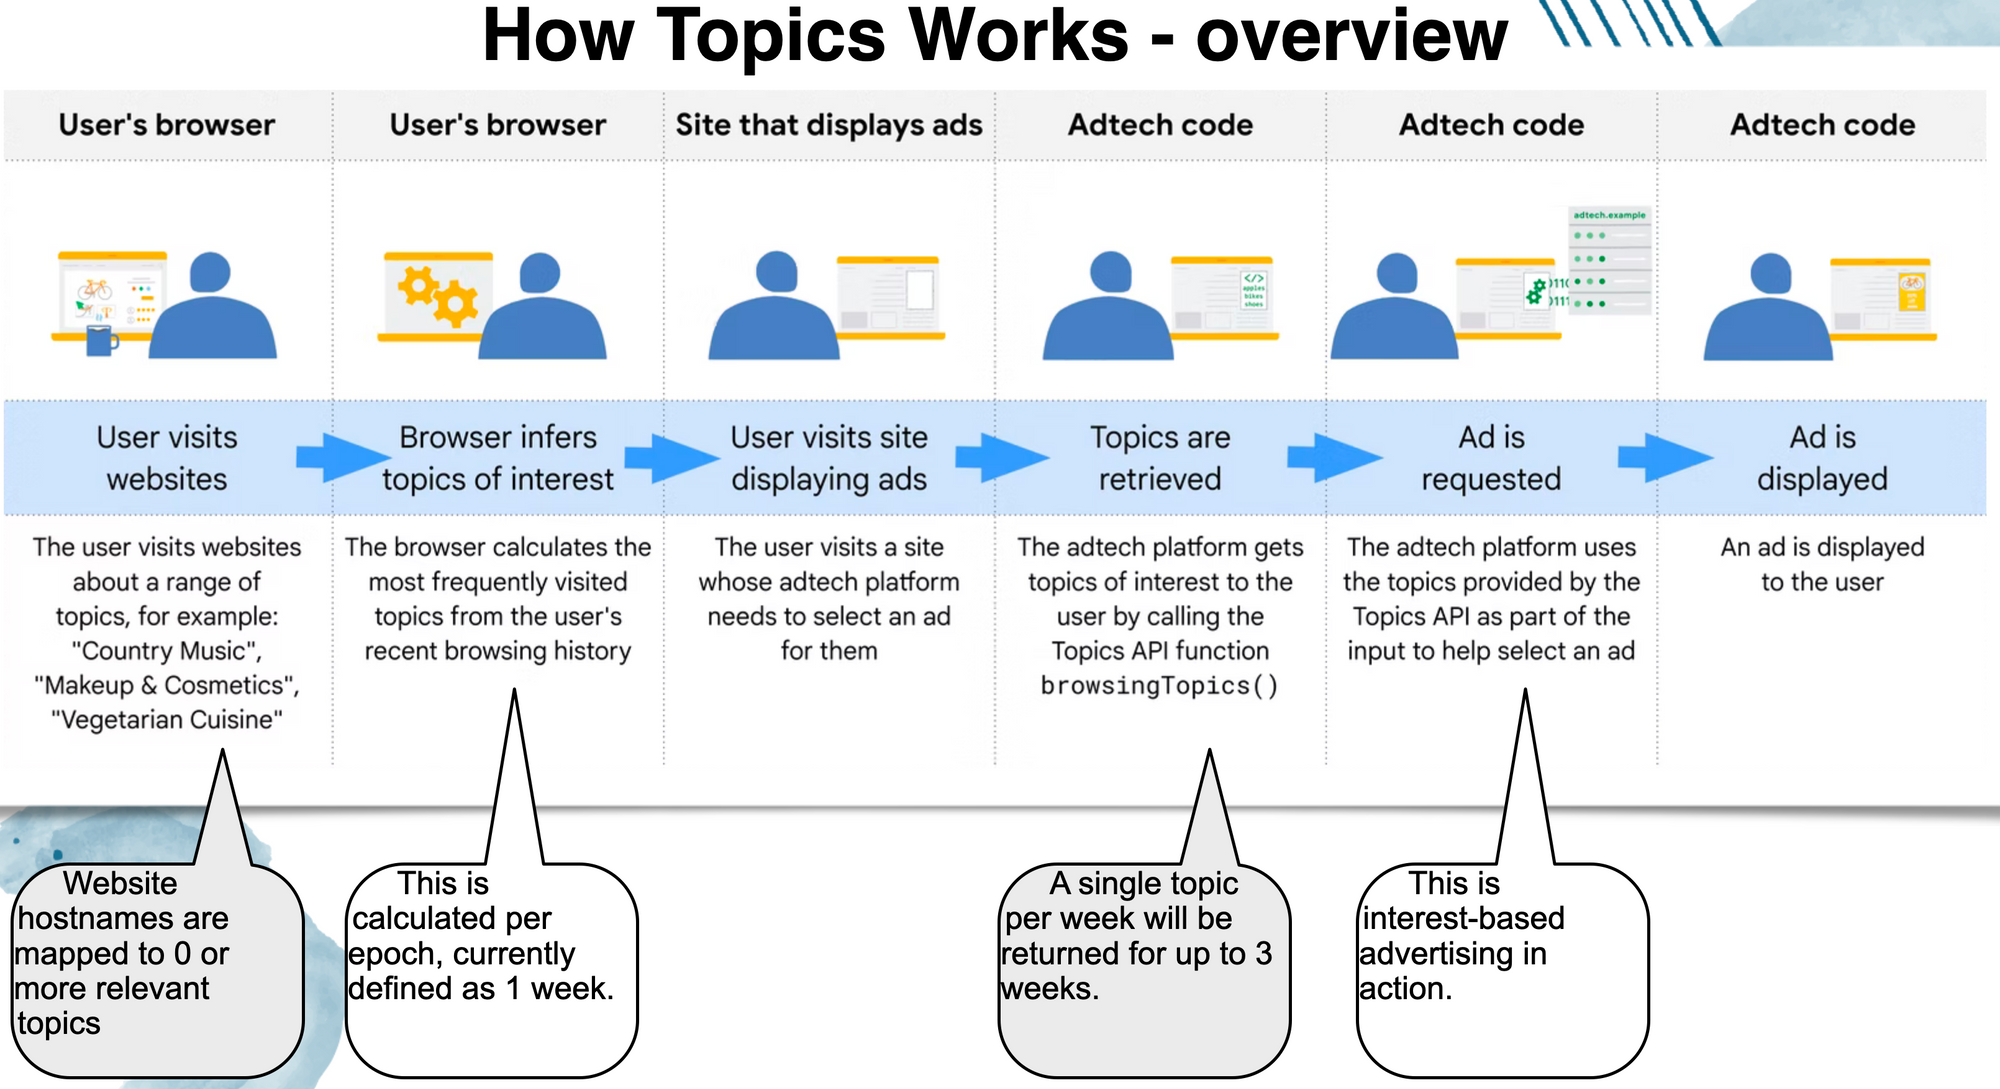 A chart with an overview of how topics are selected and used to target ads